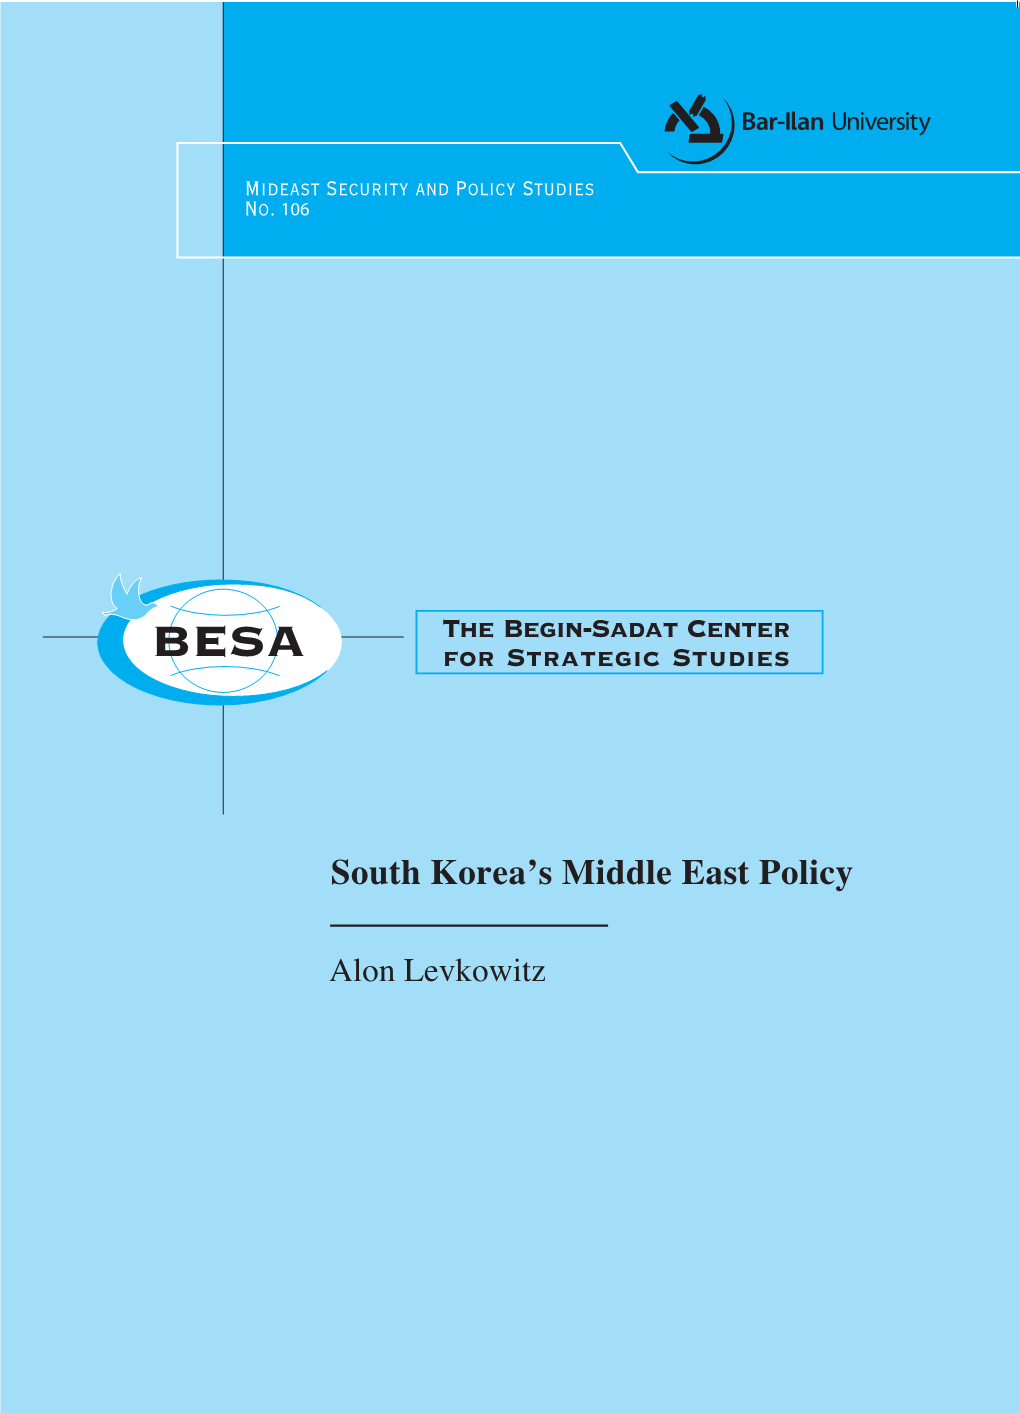 South Korea's Middle East Policy